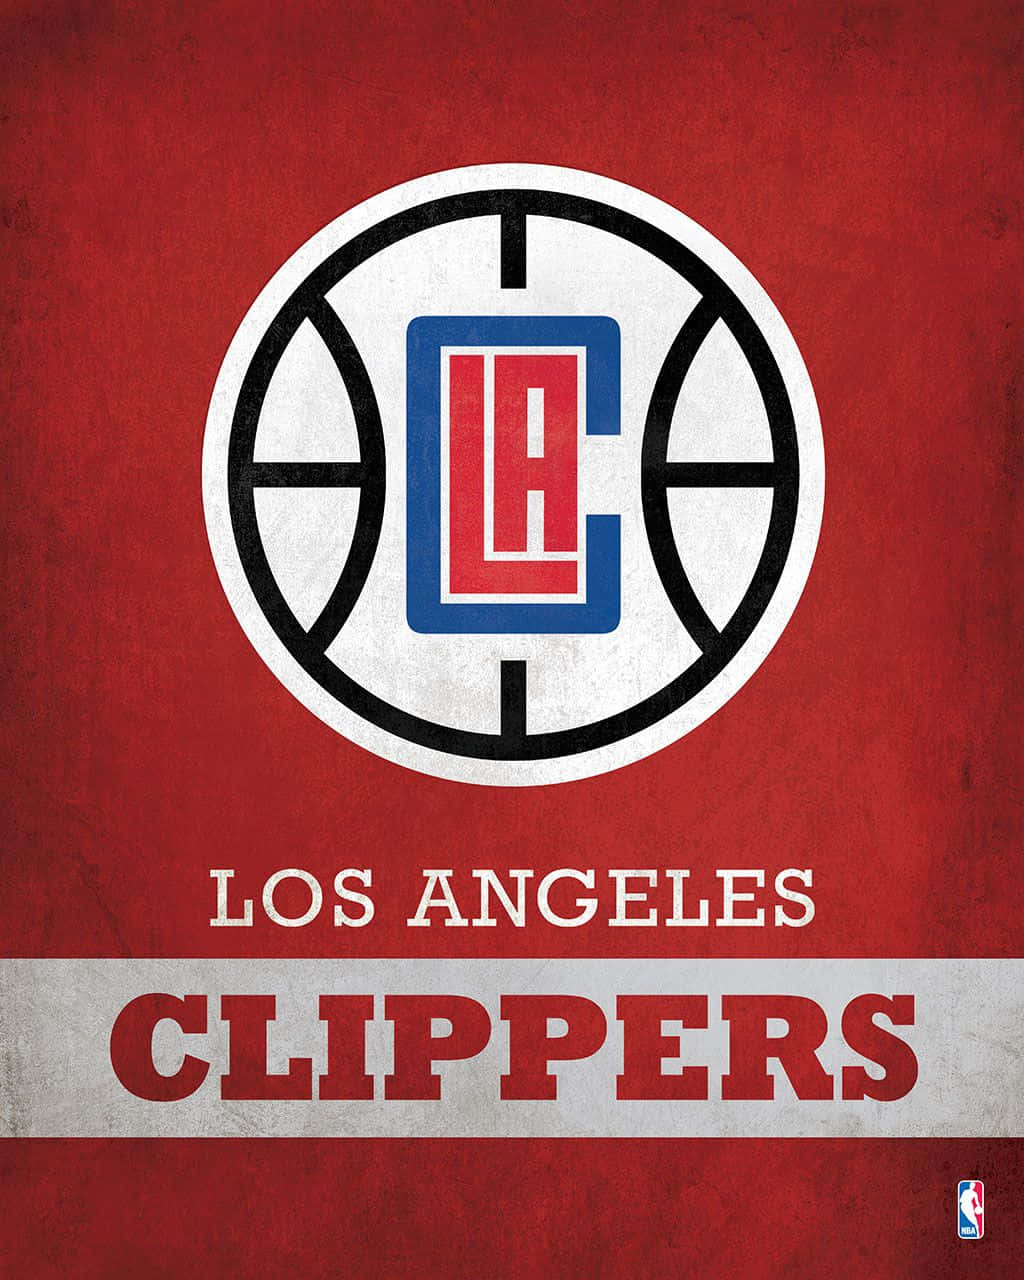 Nbabasketball Team La Clippers Rote Illustration Wallpaper